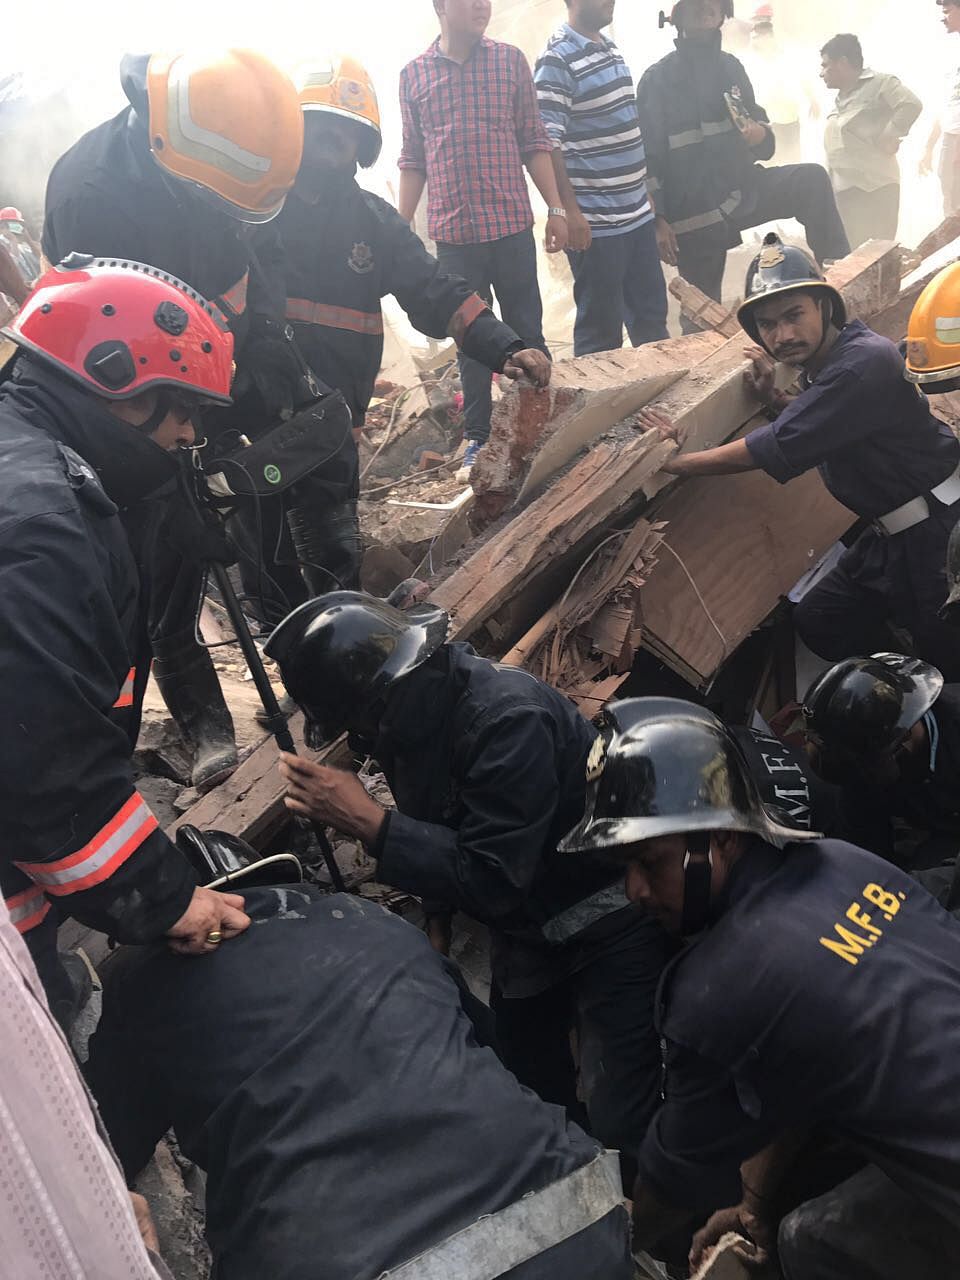 

The collapse of a five-story residential building in Mumbai’s Bhendi Bazar area has left at least 12 people dead.